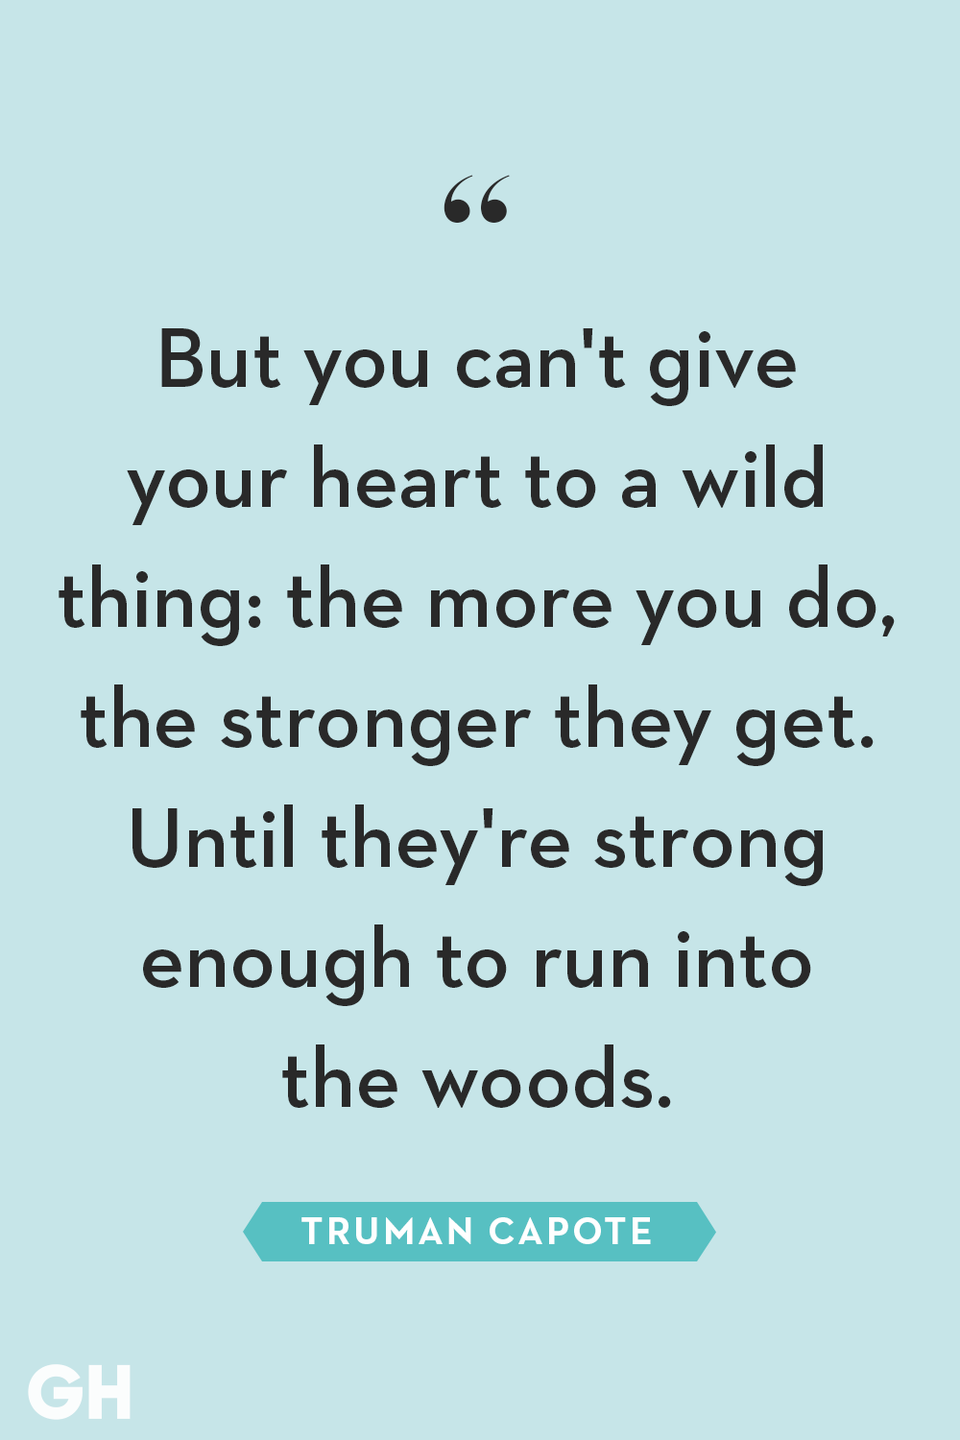 <p>But you can't give your heart to a wild thing: the more you do, the stronger they get. Until they're strong enough to run into the woods.</p>